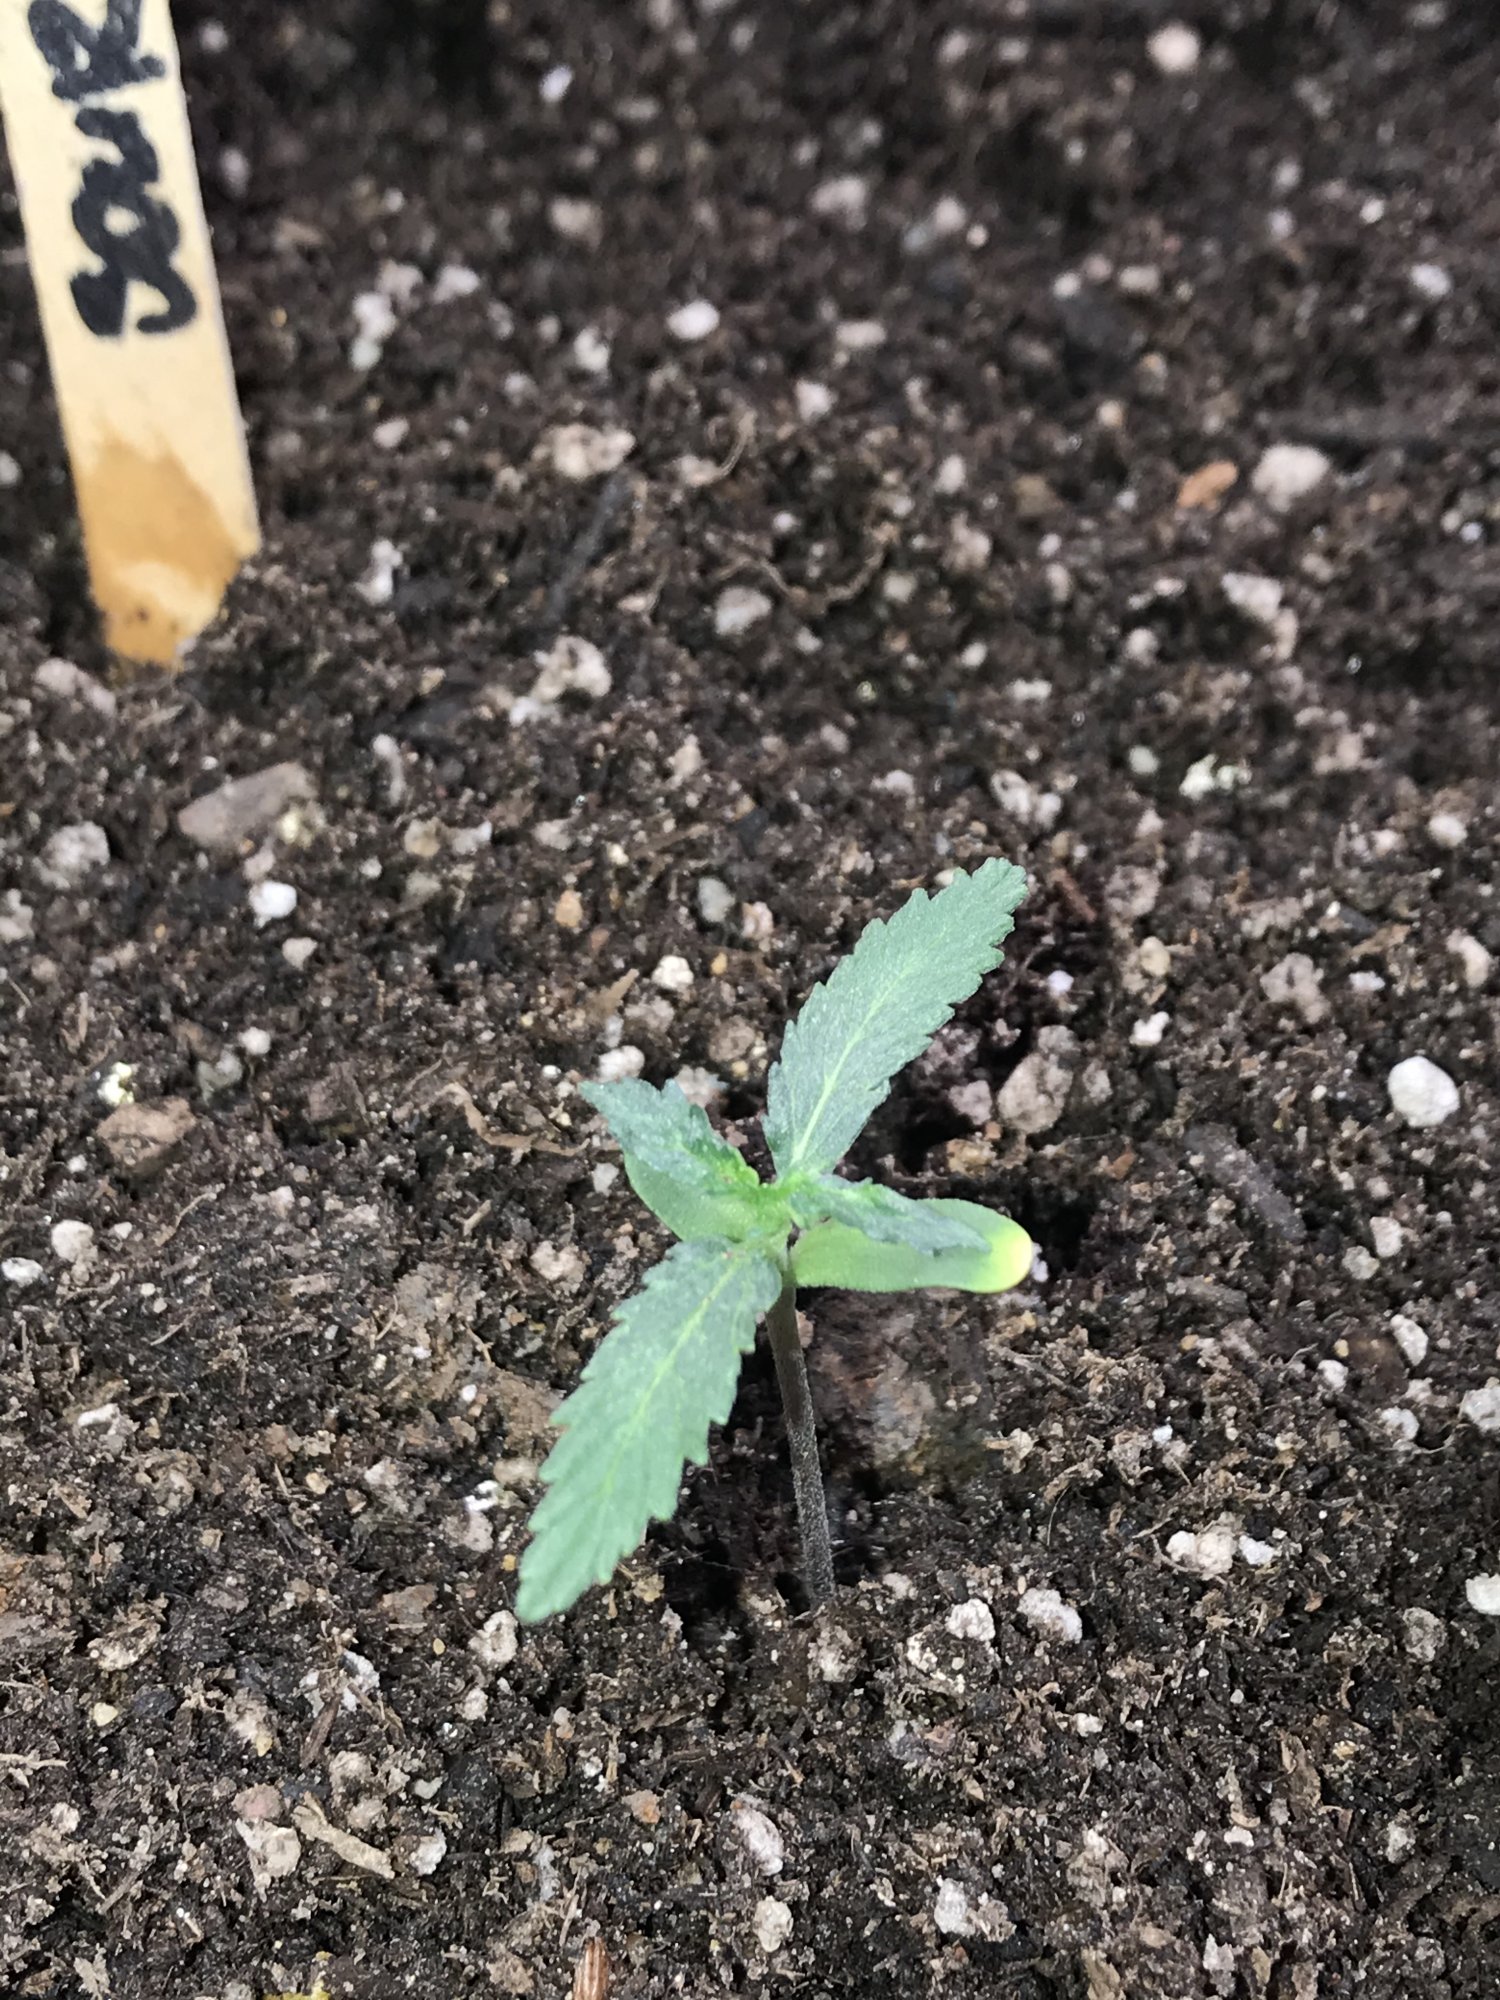 Whats wrong with my seedling